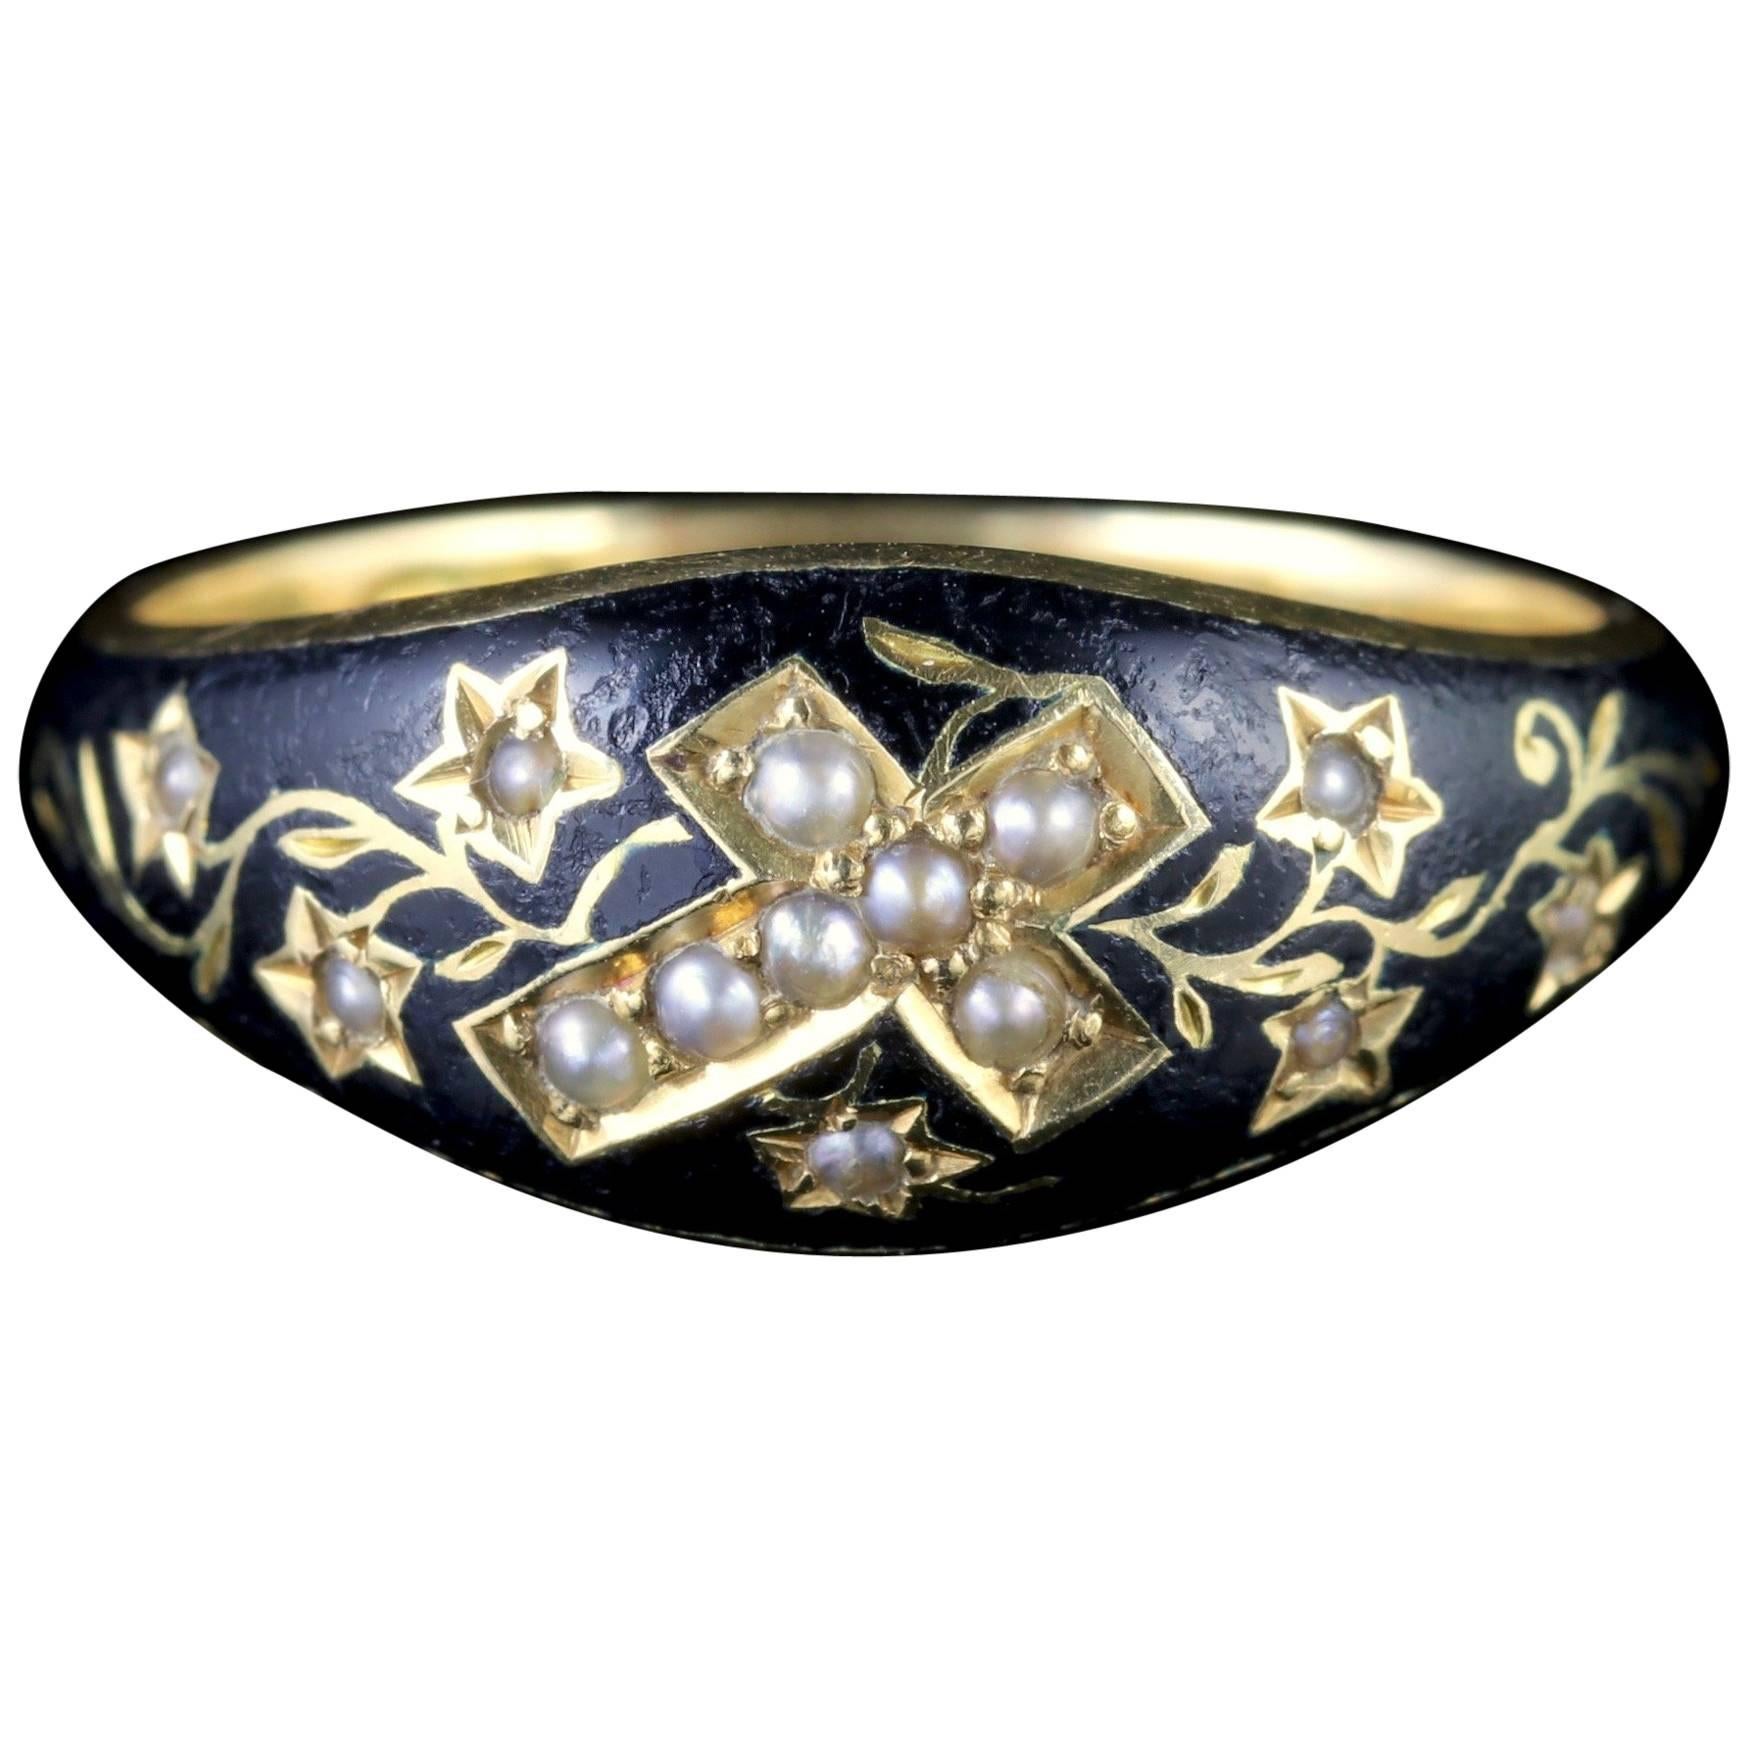 Antique Edwardian 18 Carat Gold Mourning Cross Ring Dated 1901